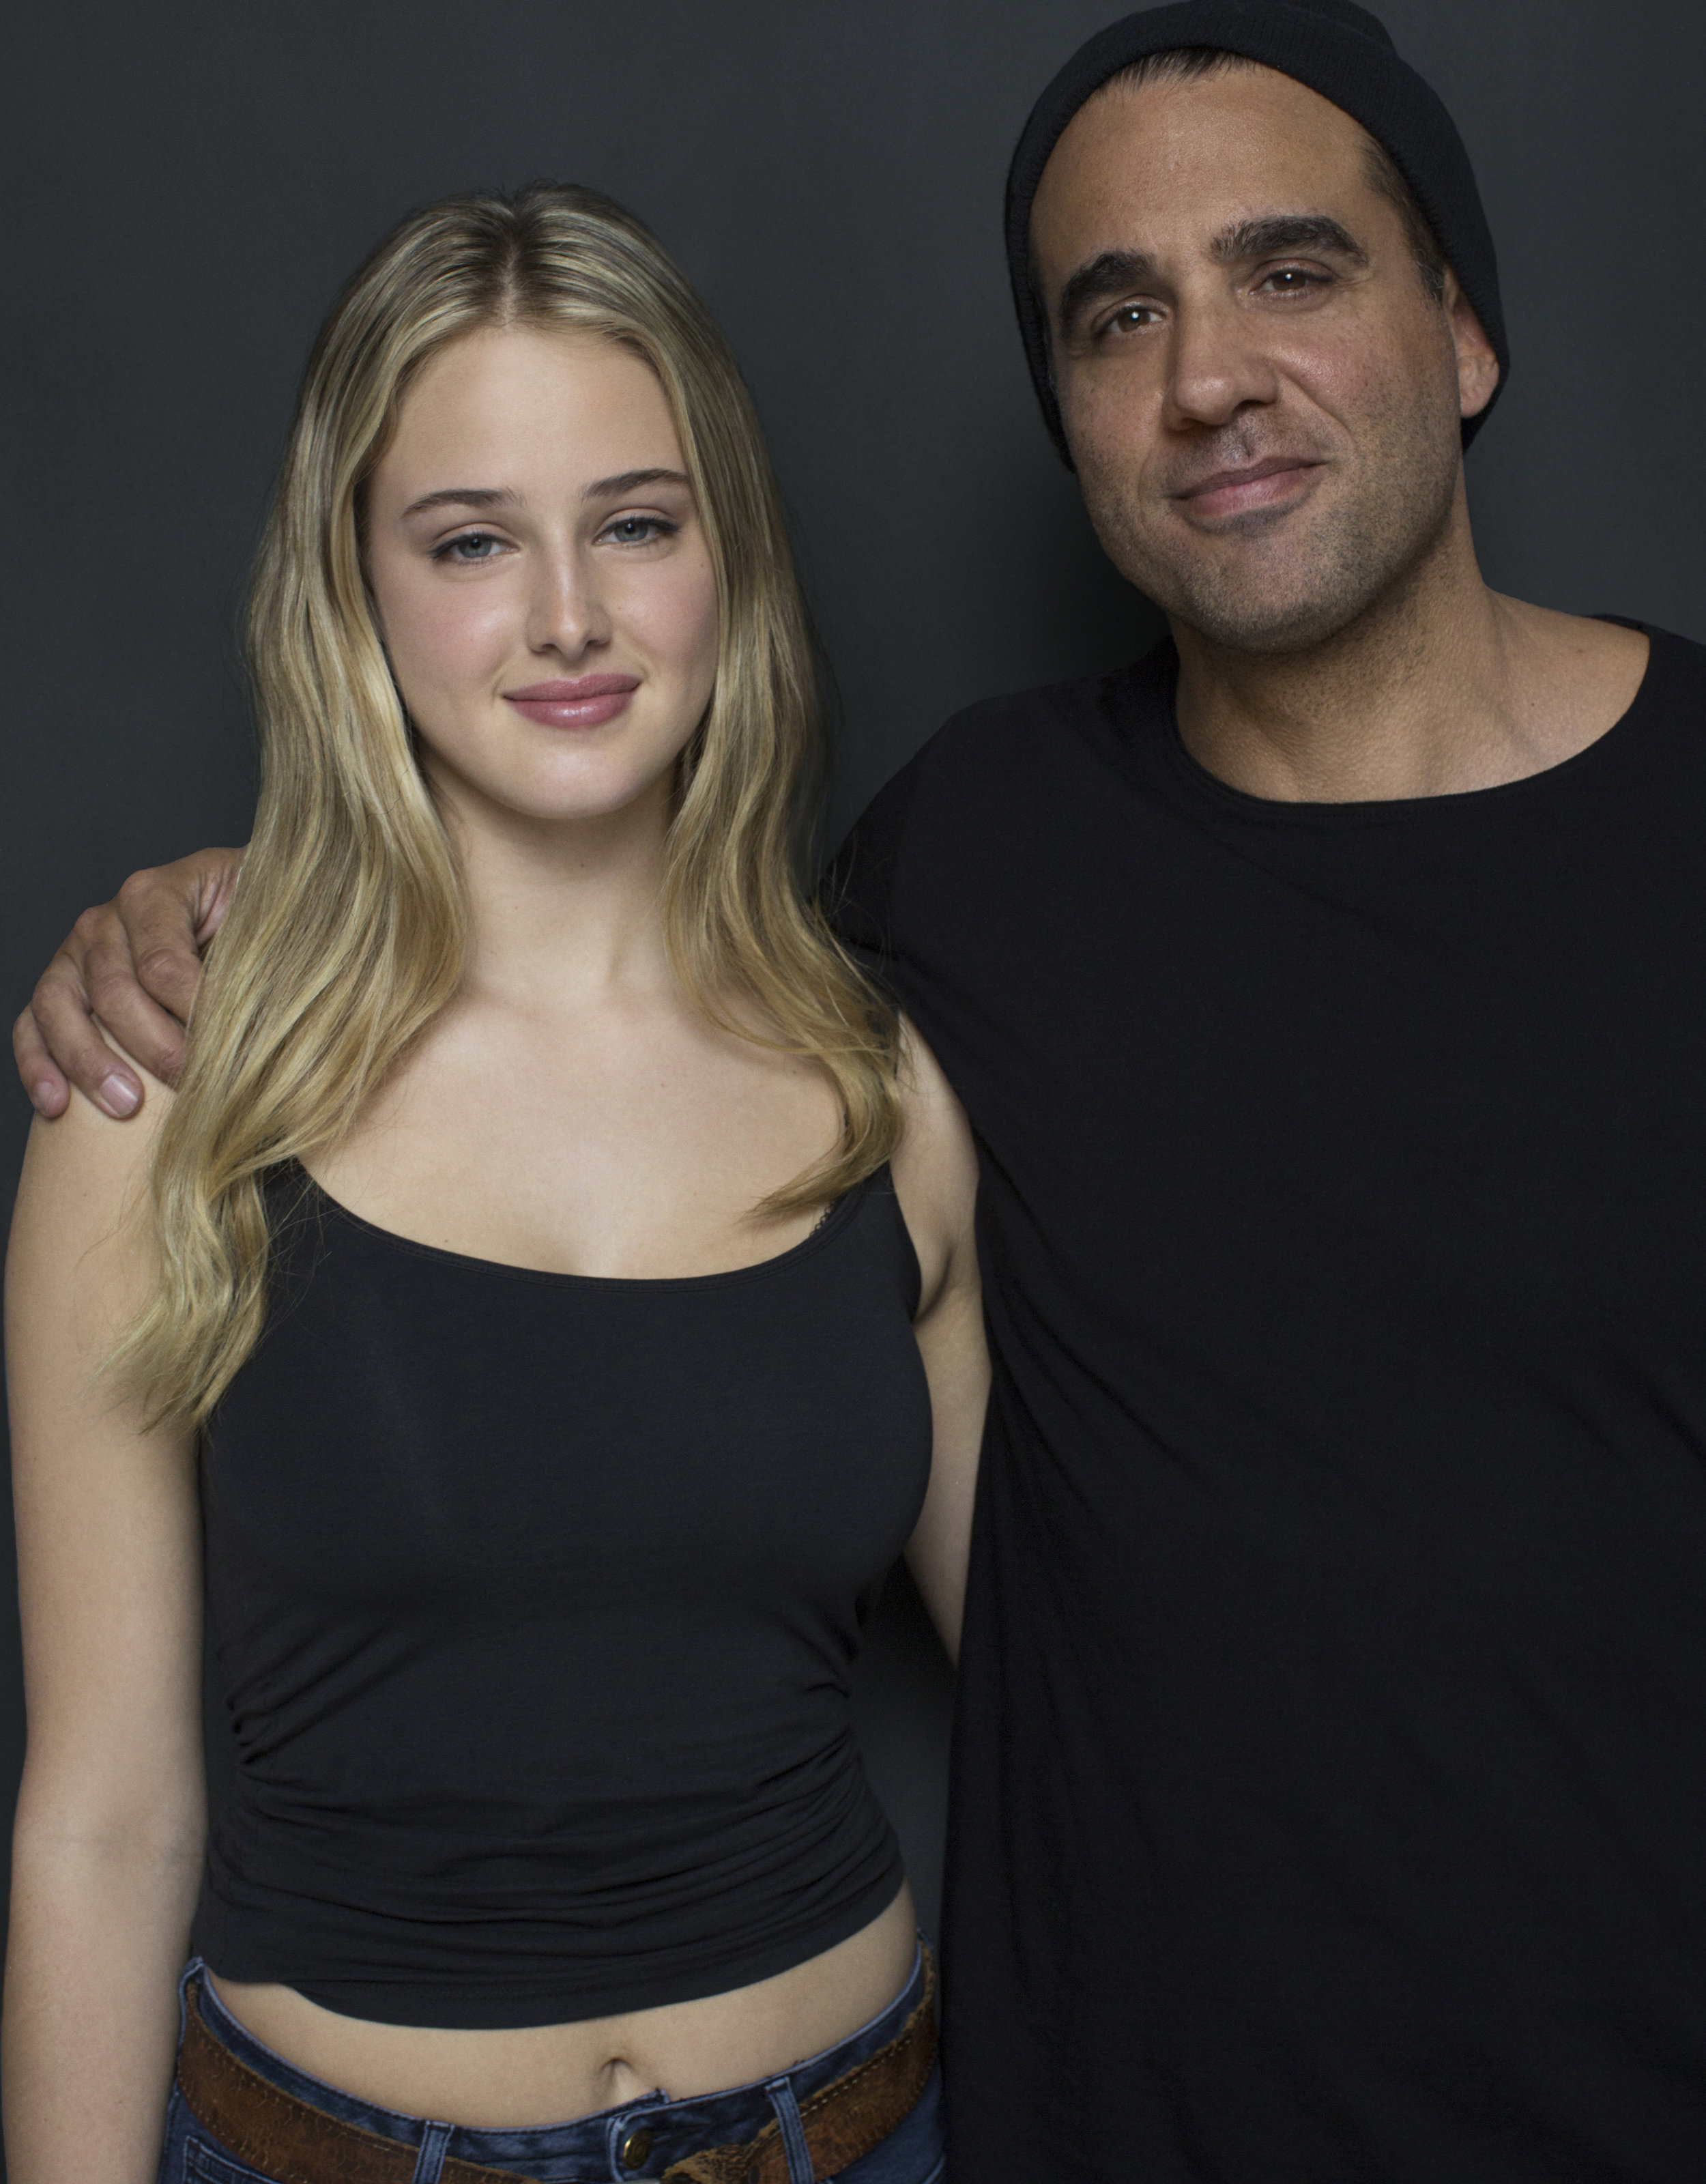 anna van patten & Bobby cannavale / ITS harassment campaign.